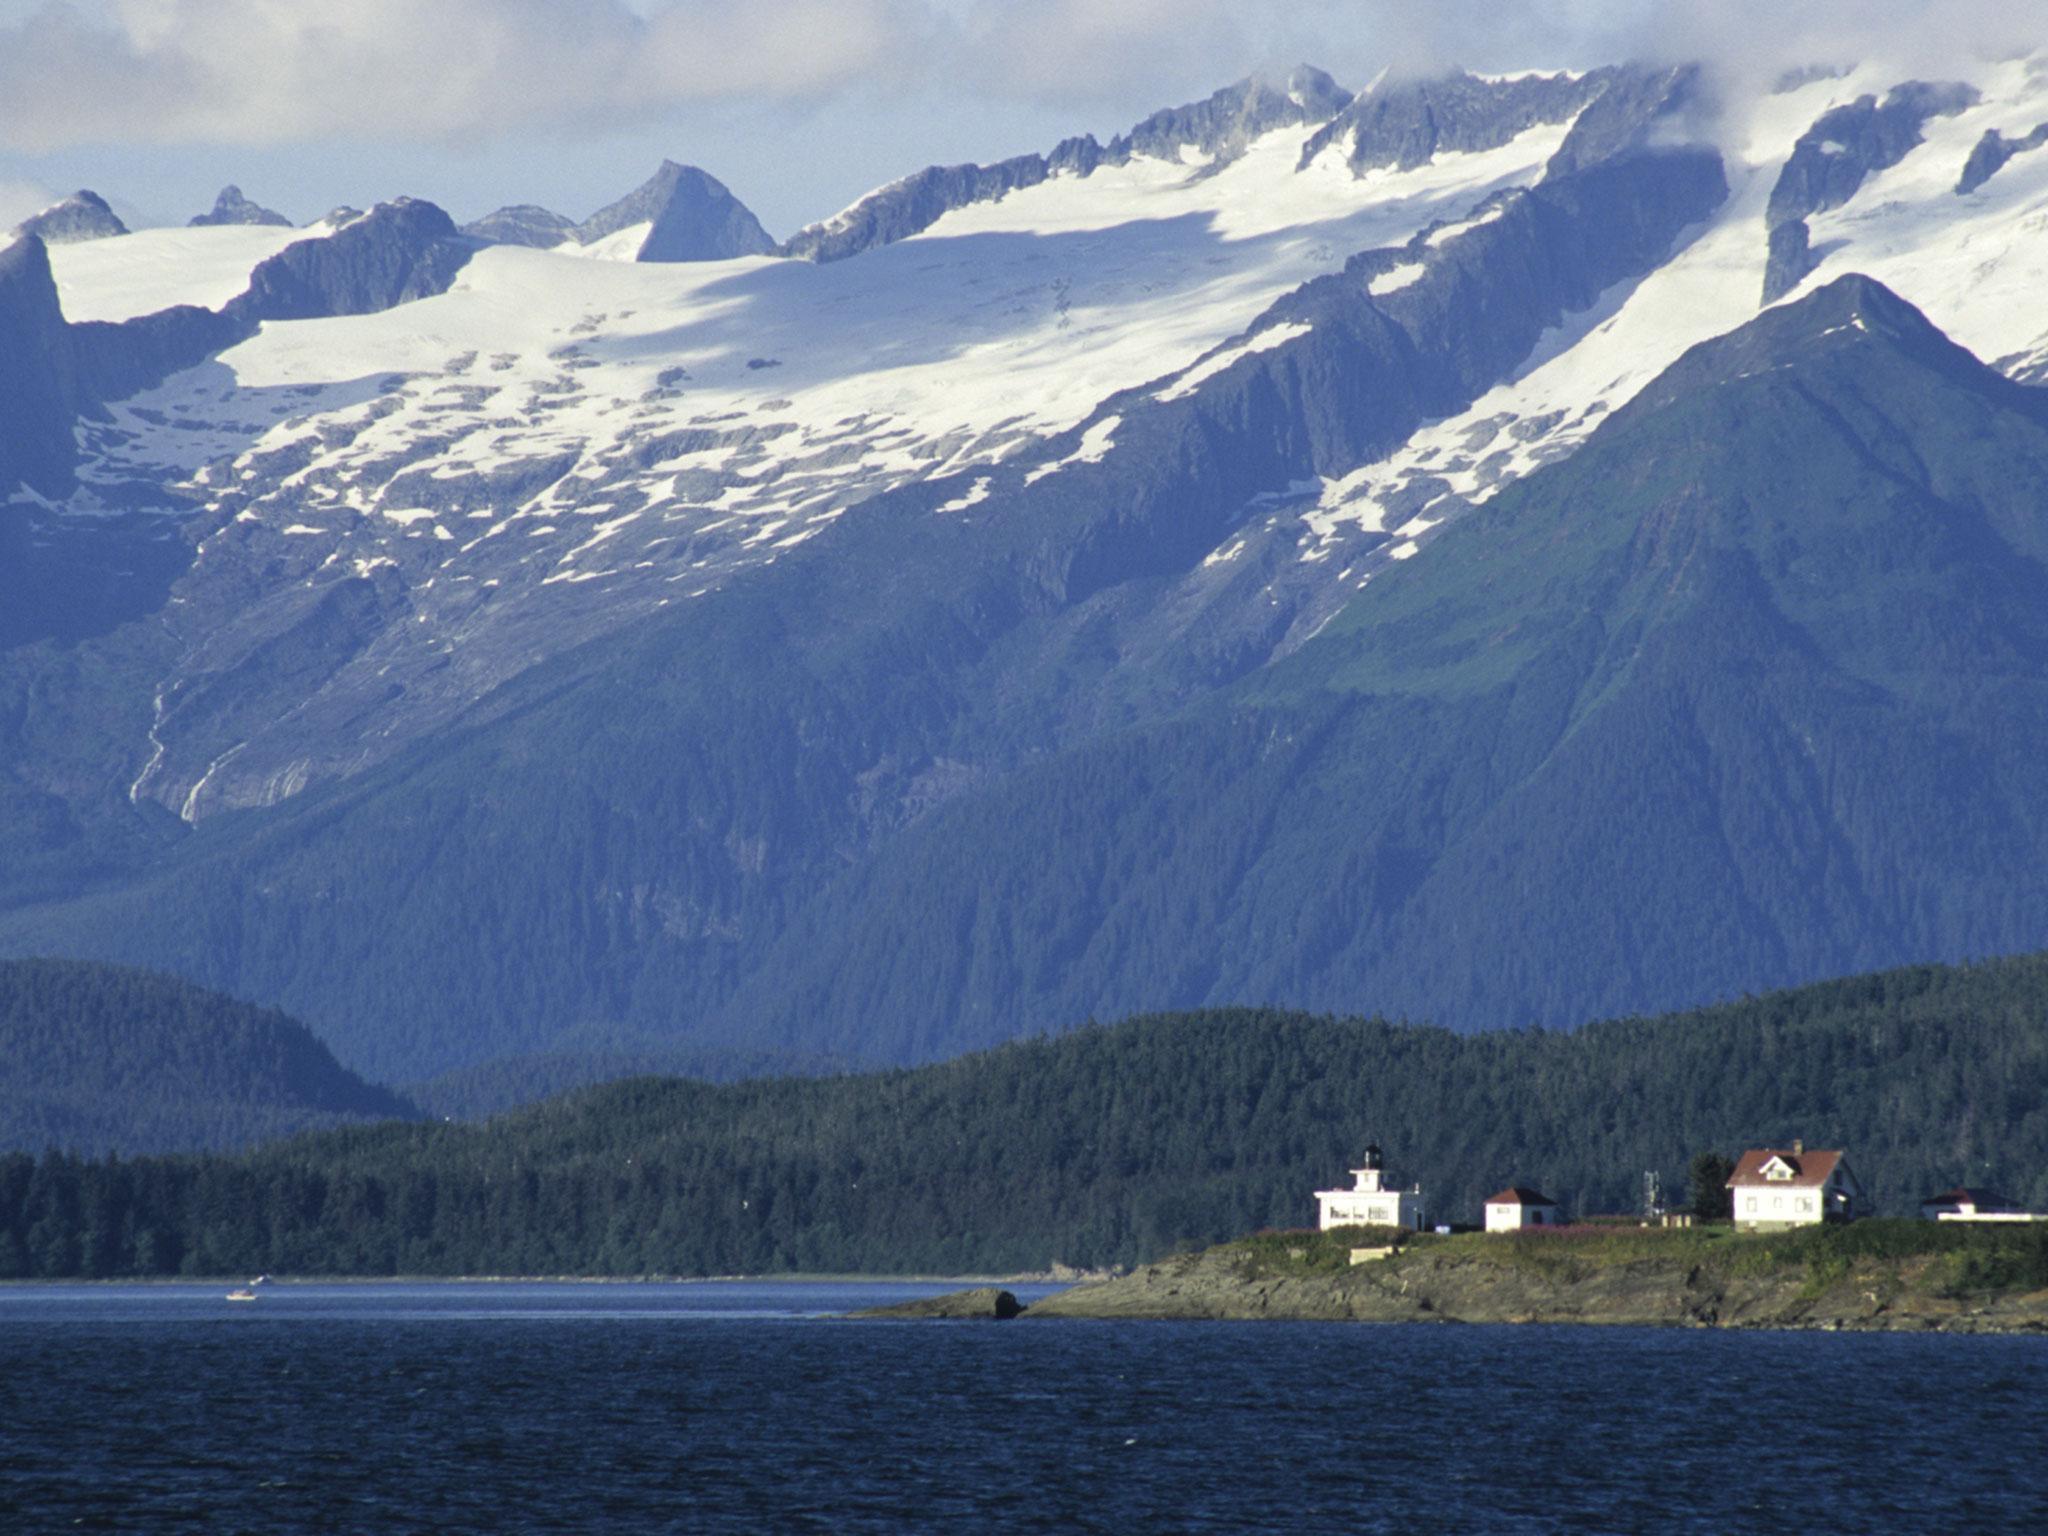 It was the 150th anniversary of the sale of Alaska to the US this week